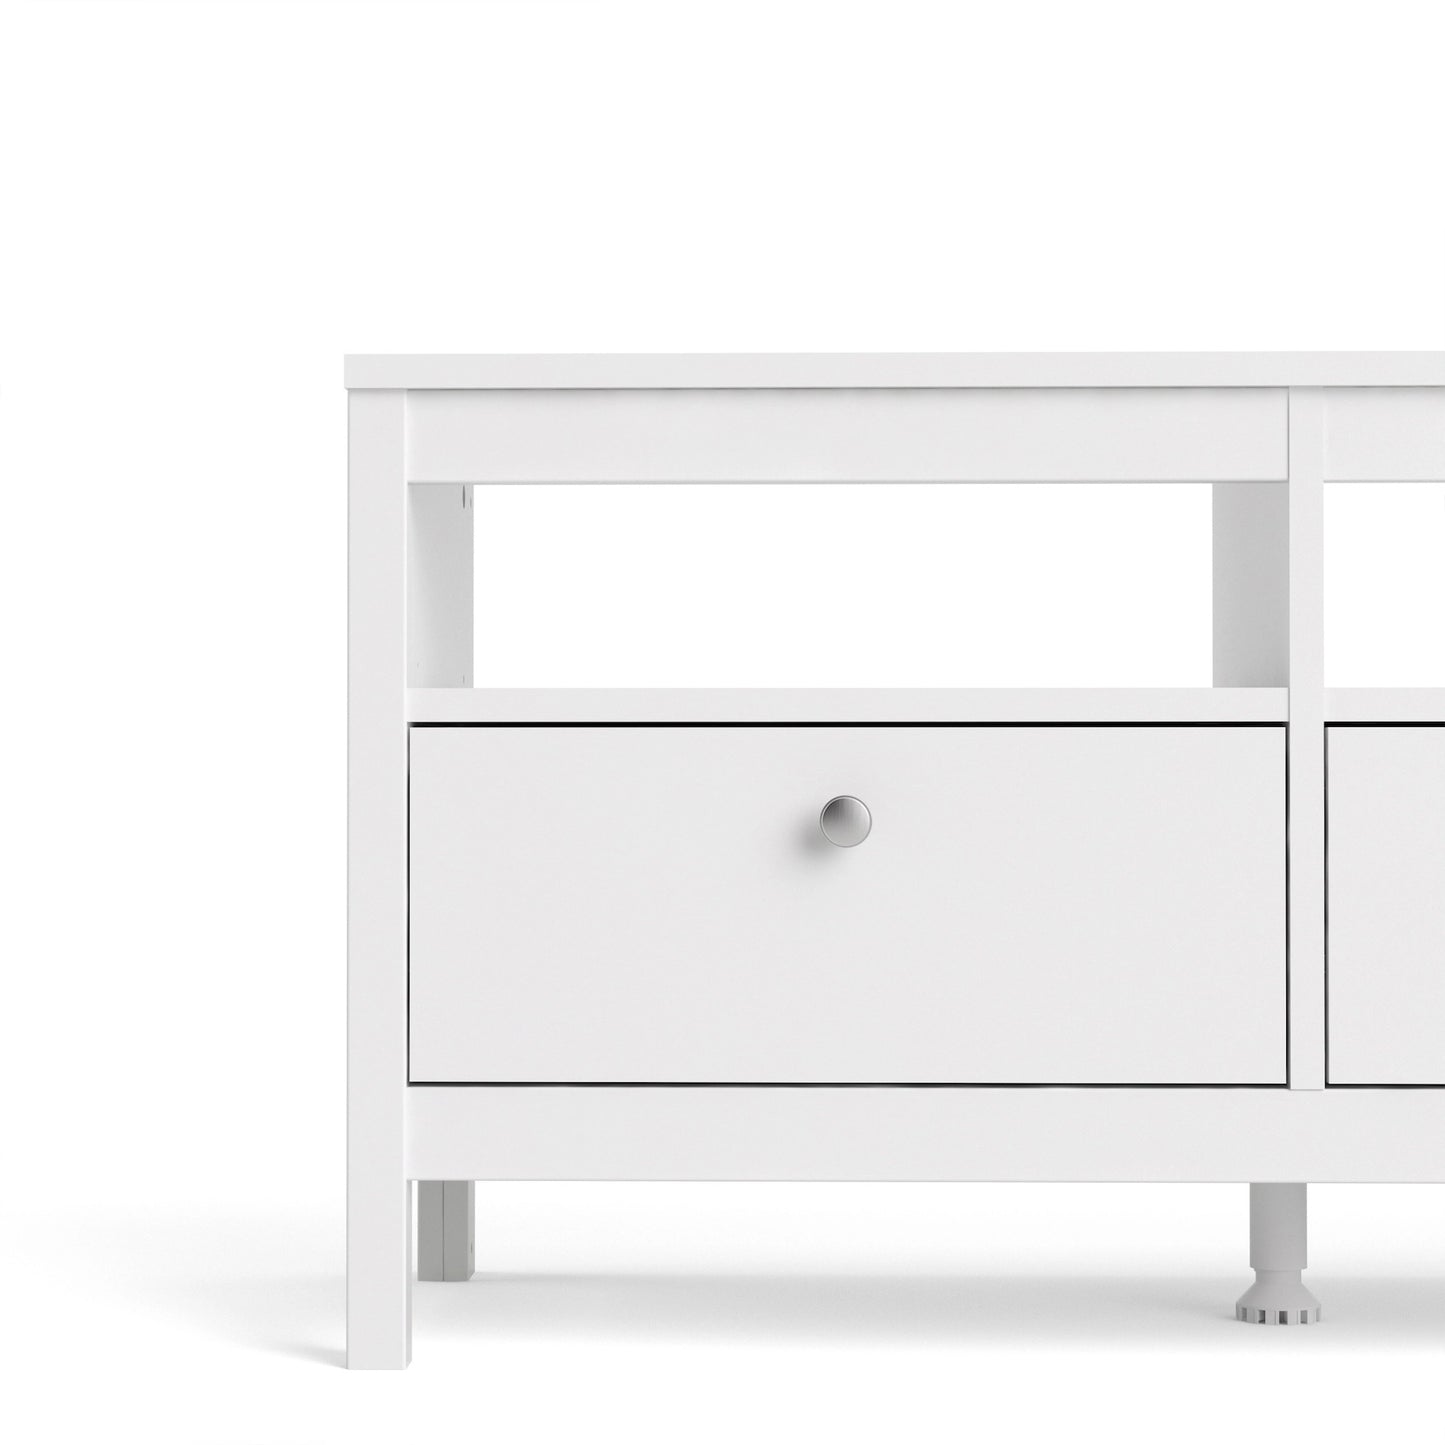 Furniture To Go Madrid TV-Unit 3 Drawers in White